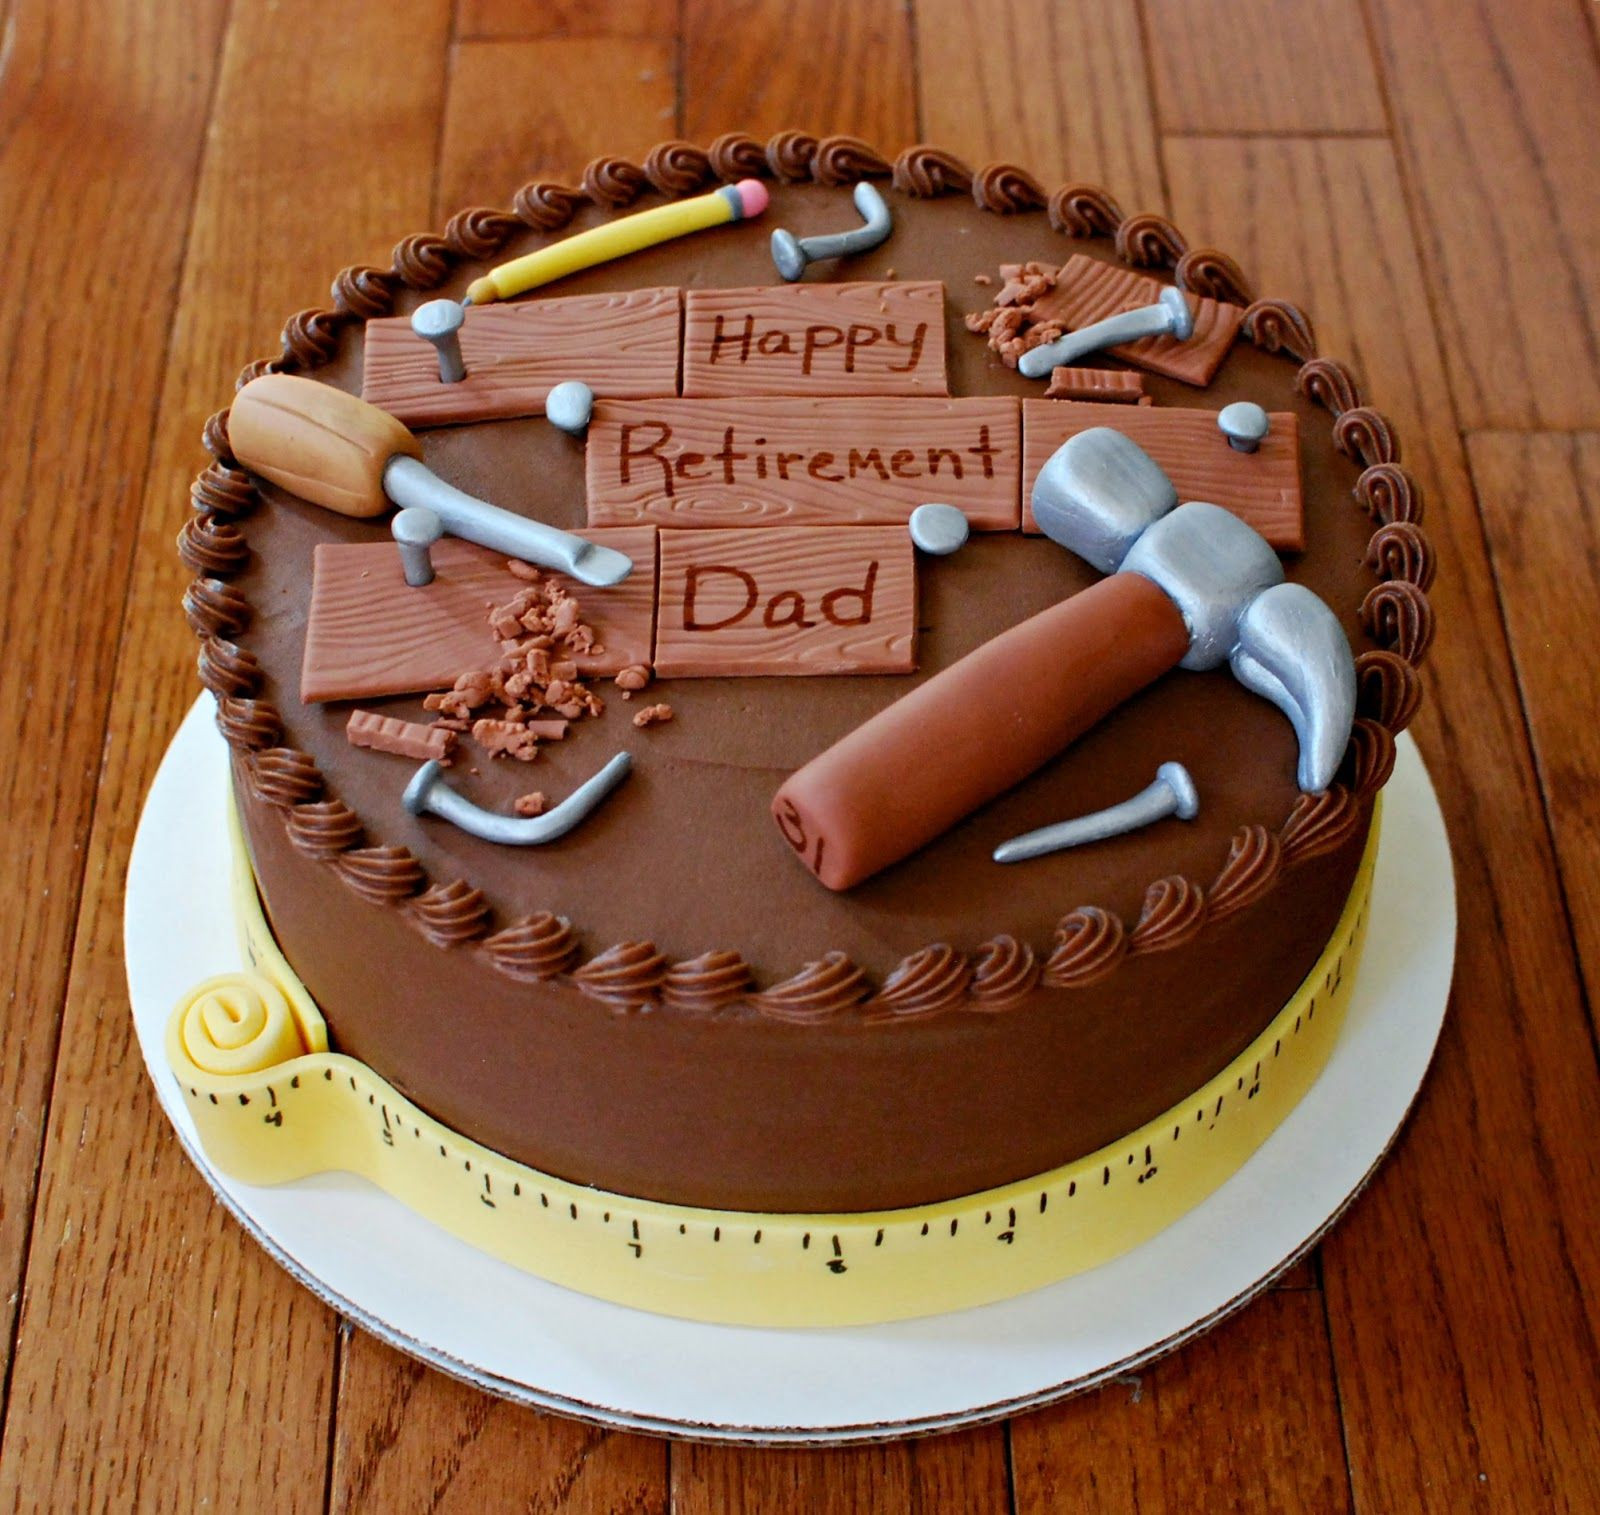 Retirement Party Ideas For Dad
 Carpentry Retirement Cake by Snacky French